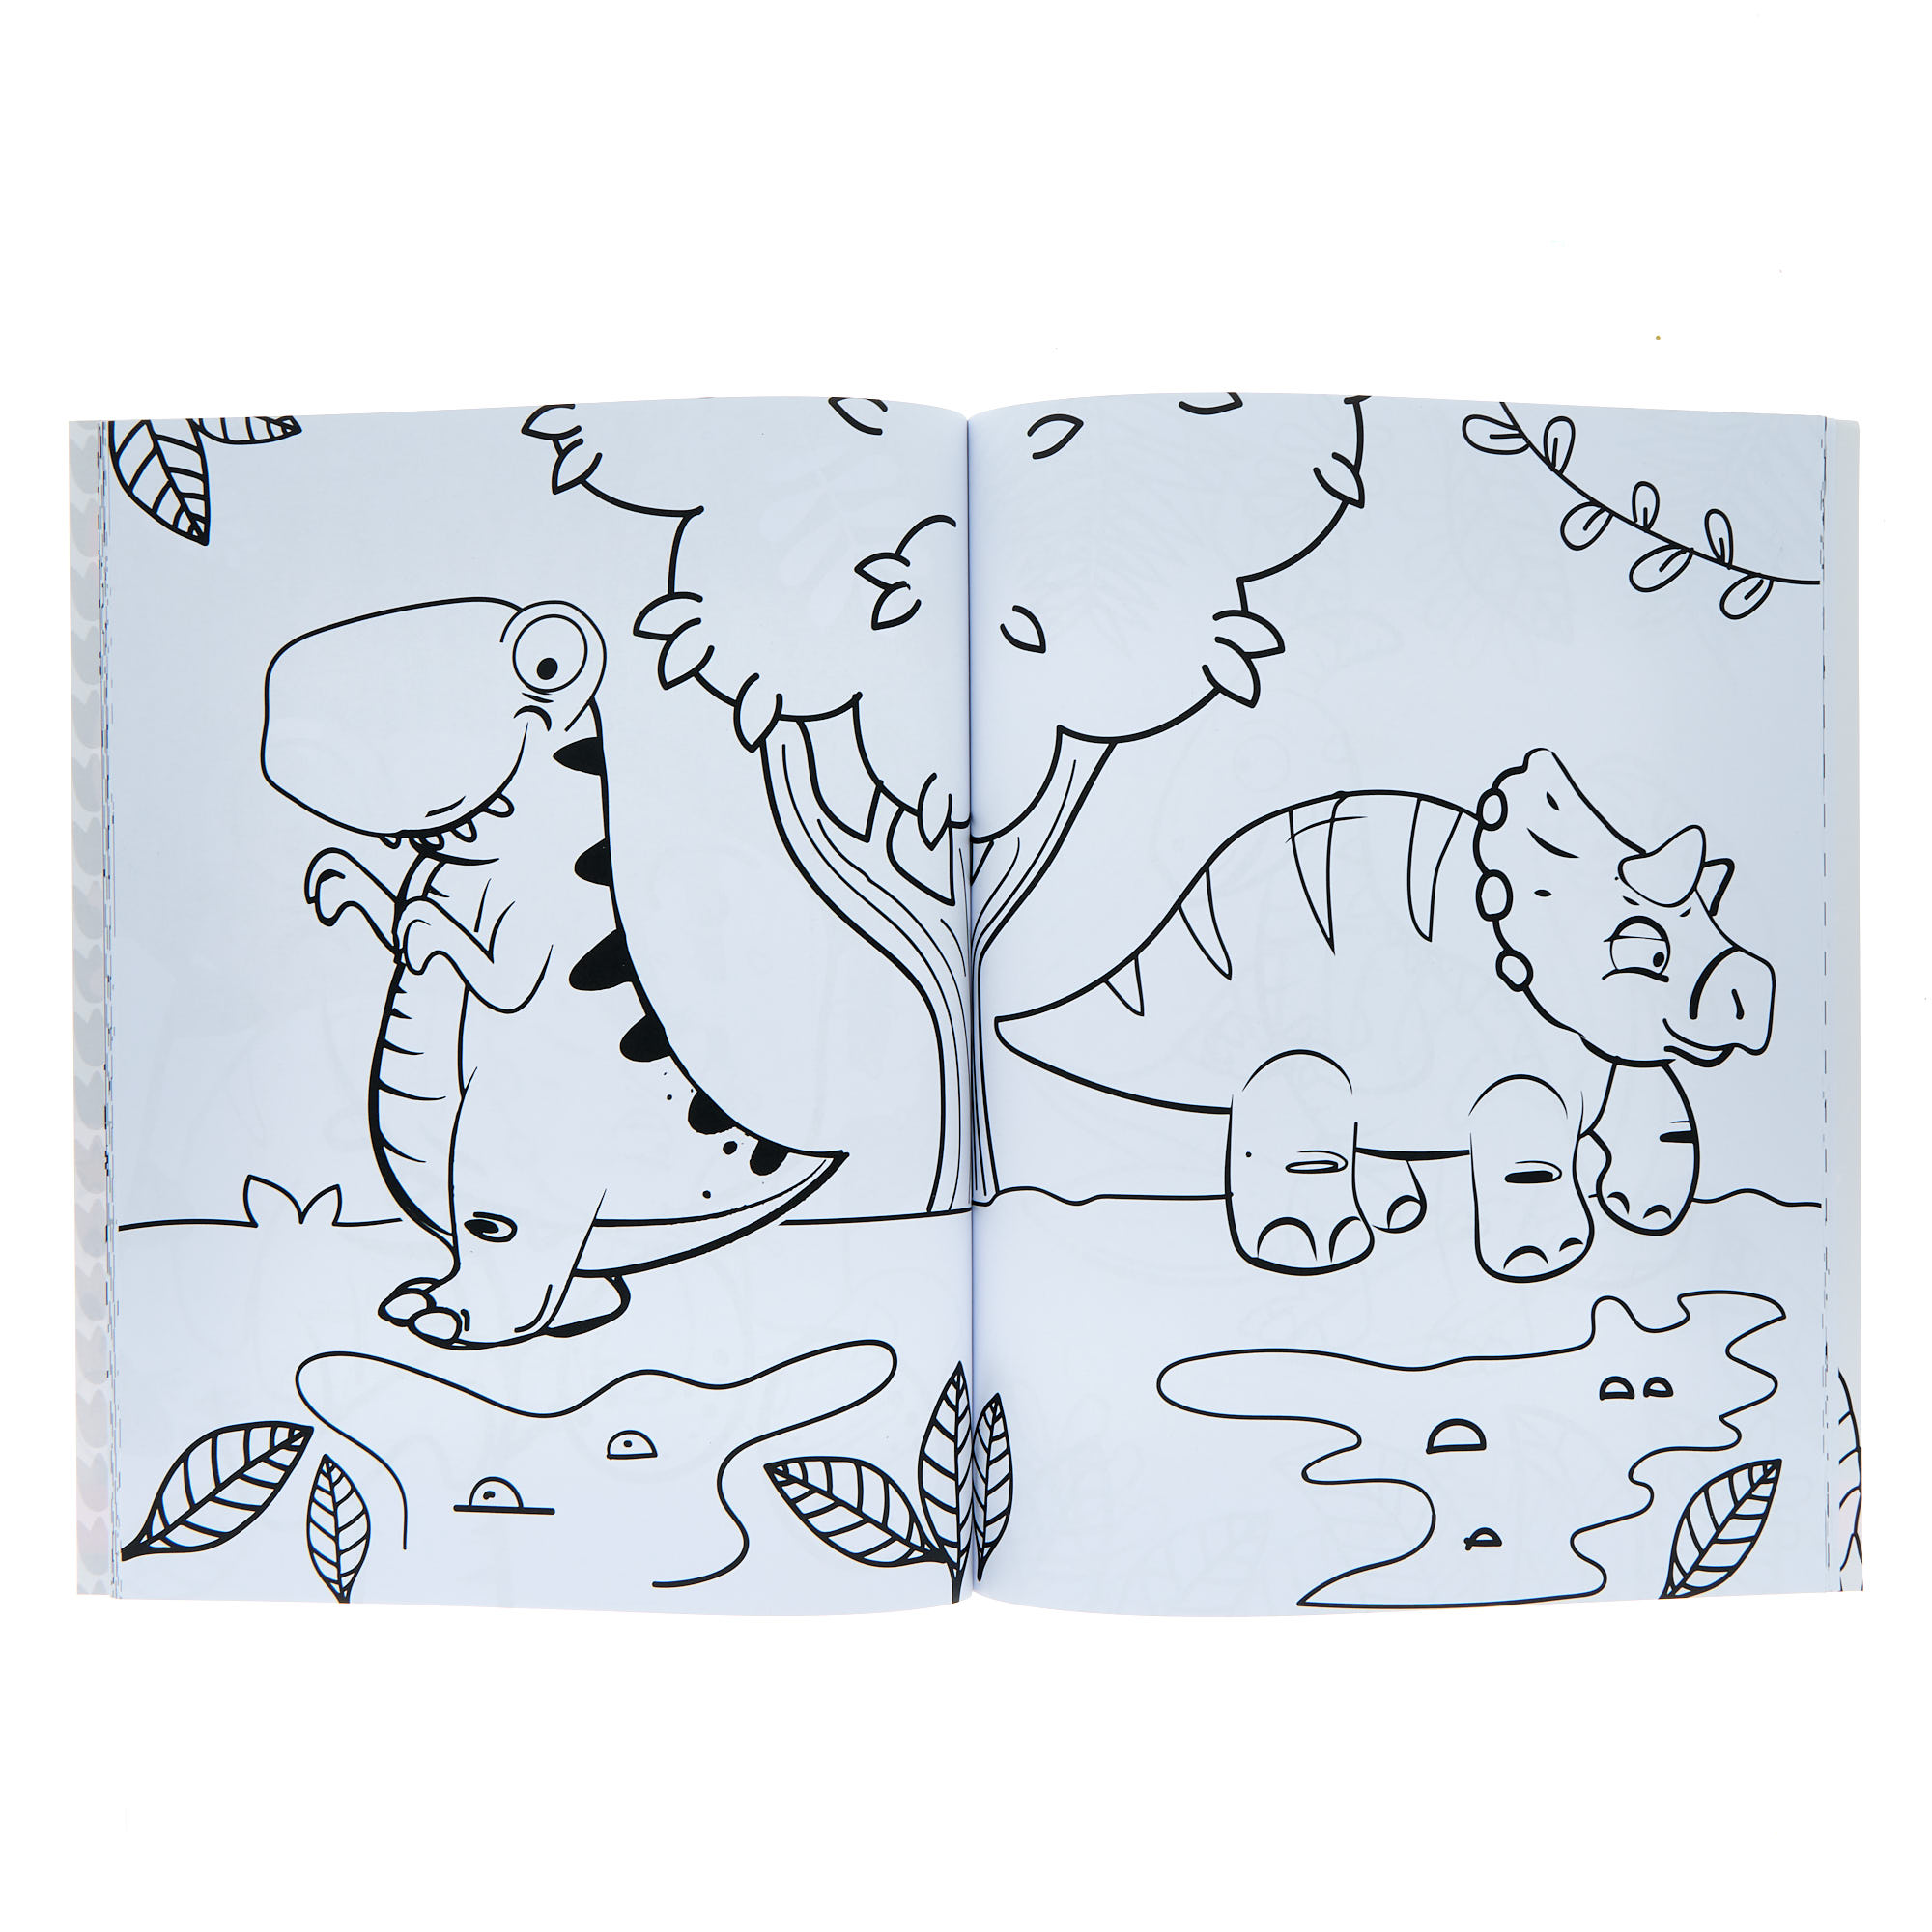 Ultimate Dinosaur Colouring Book